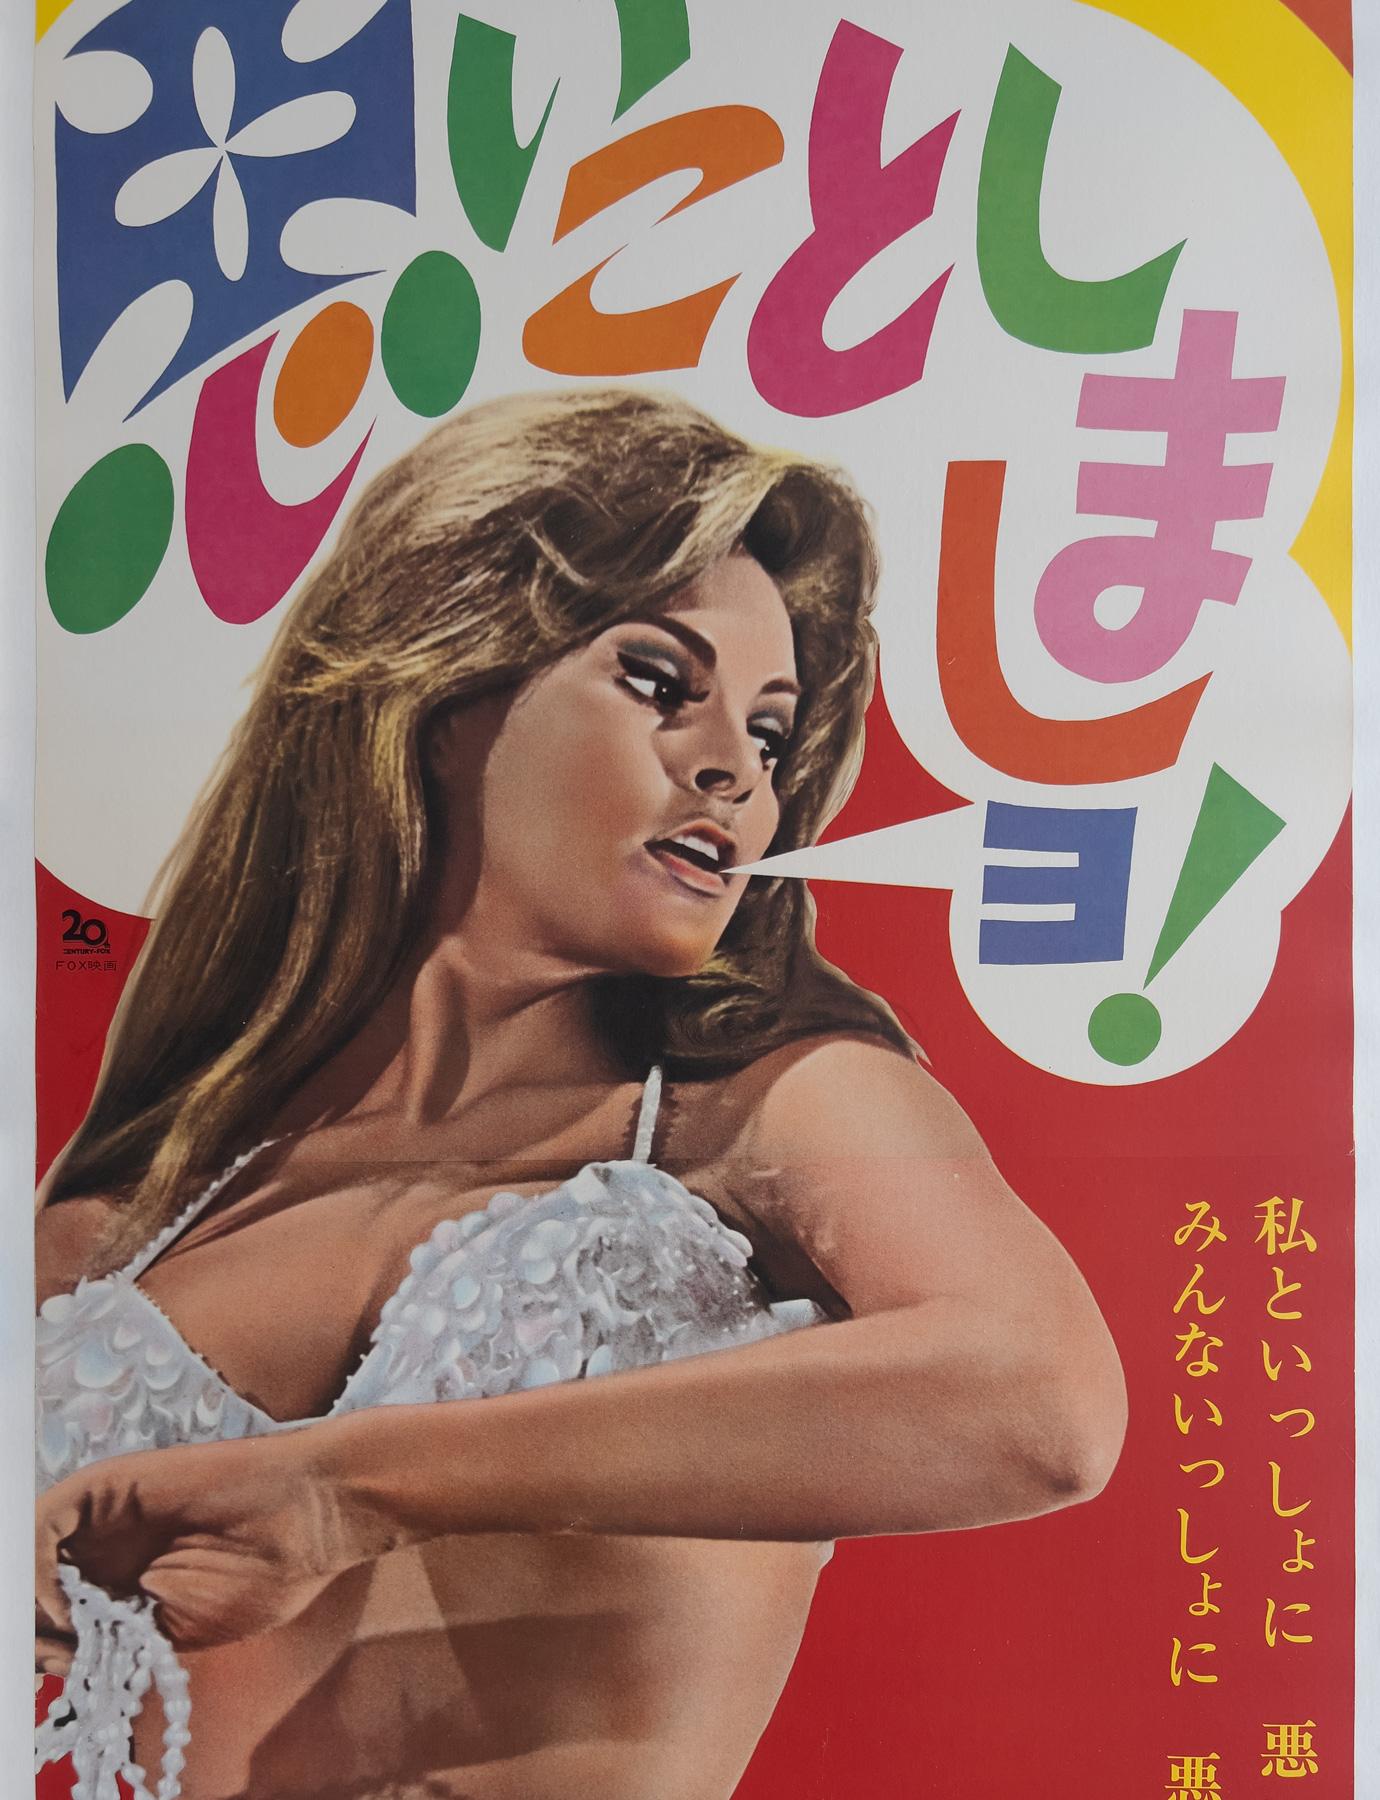 20th Century Bedazzled 1968 Original Japanese Tatekan 2 Sheet Film Poster For Sale